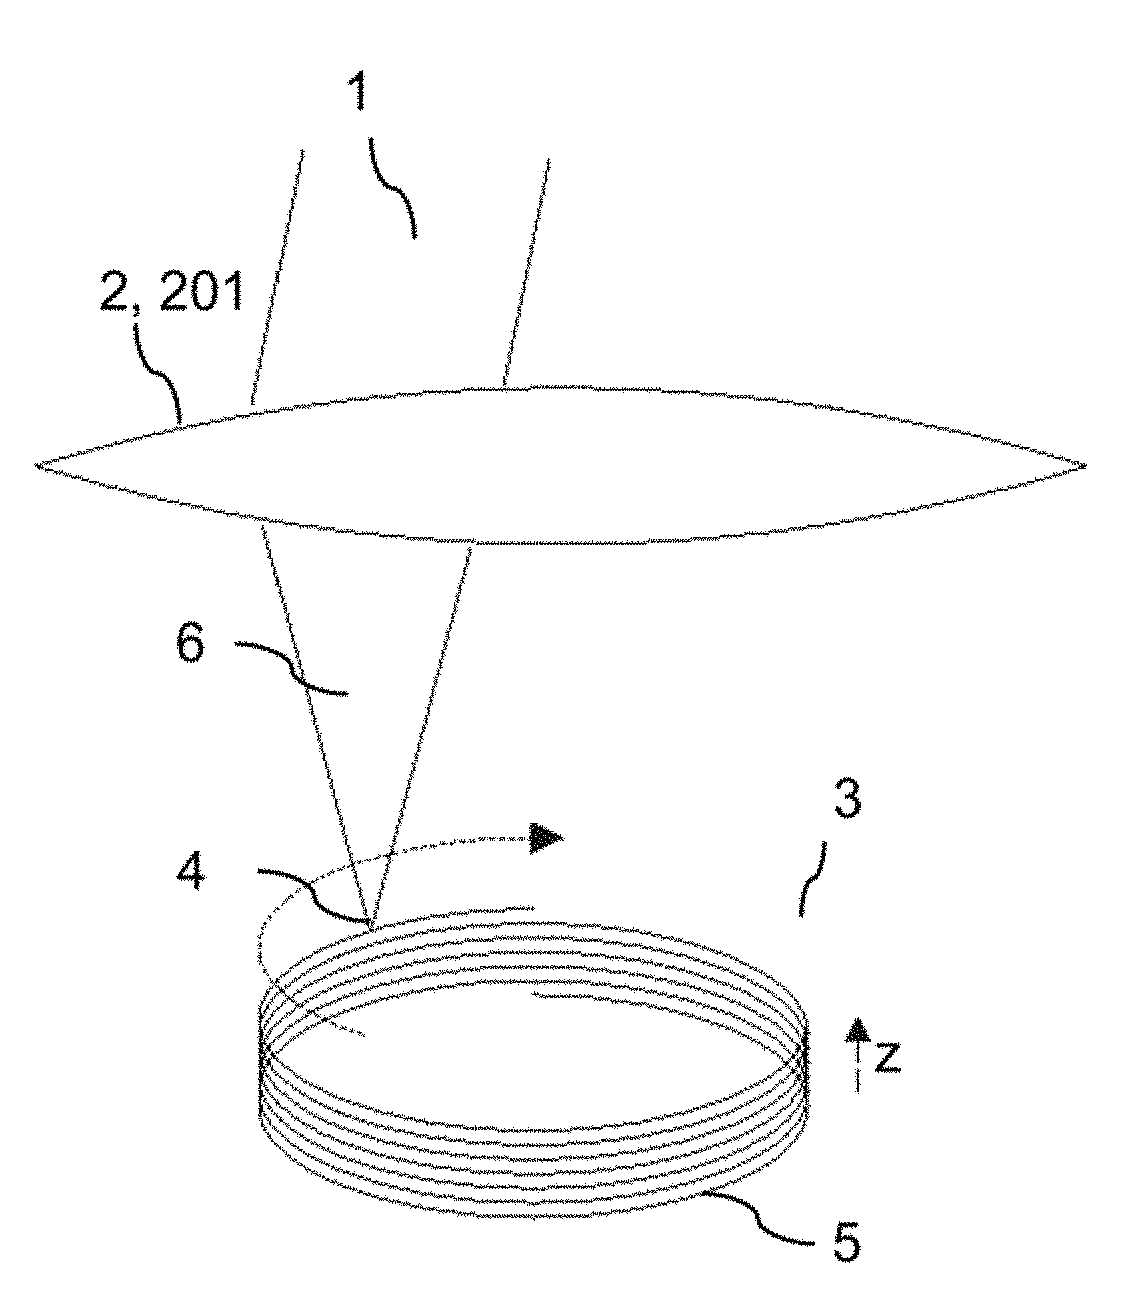 Opthalmologic therapy system and method for processing a portion of a processing volume of a transparent material by application of focused radiation